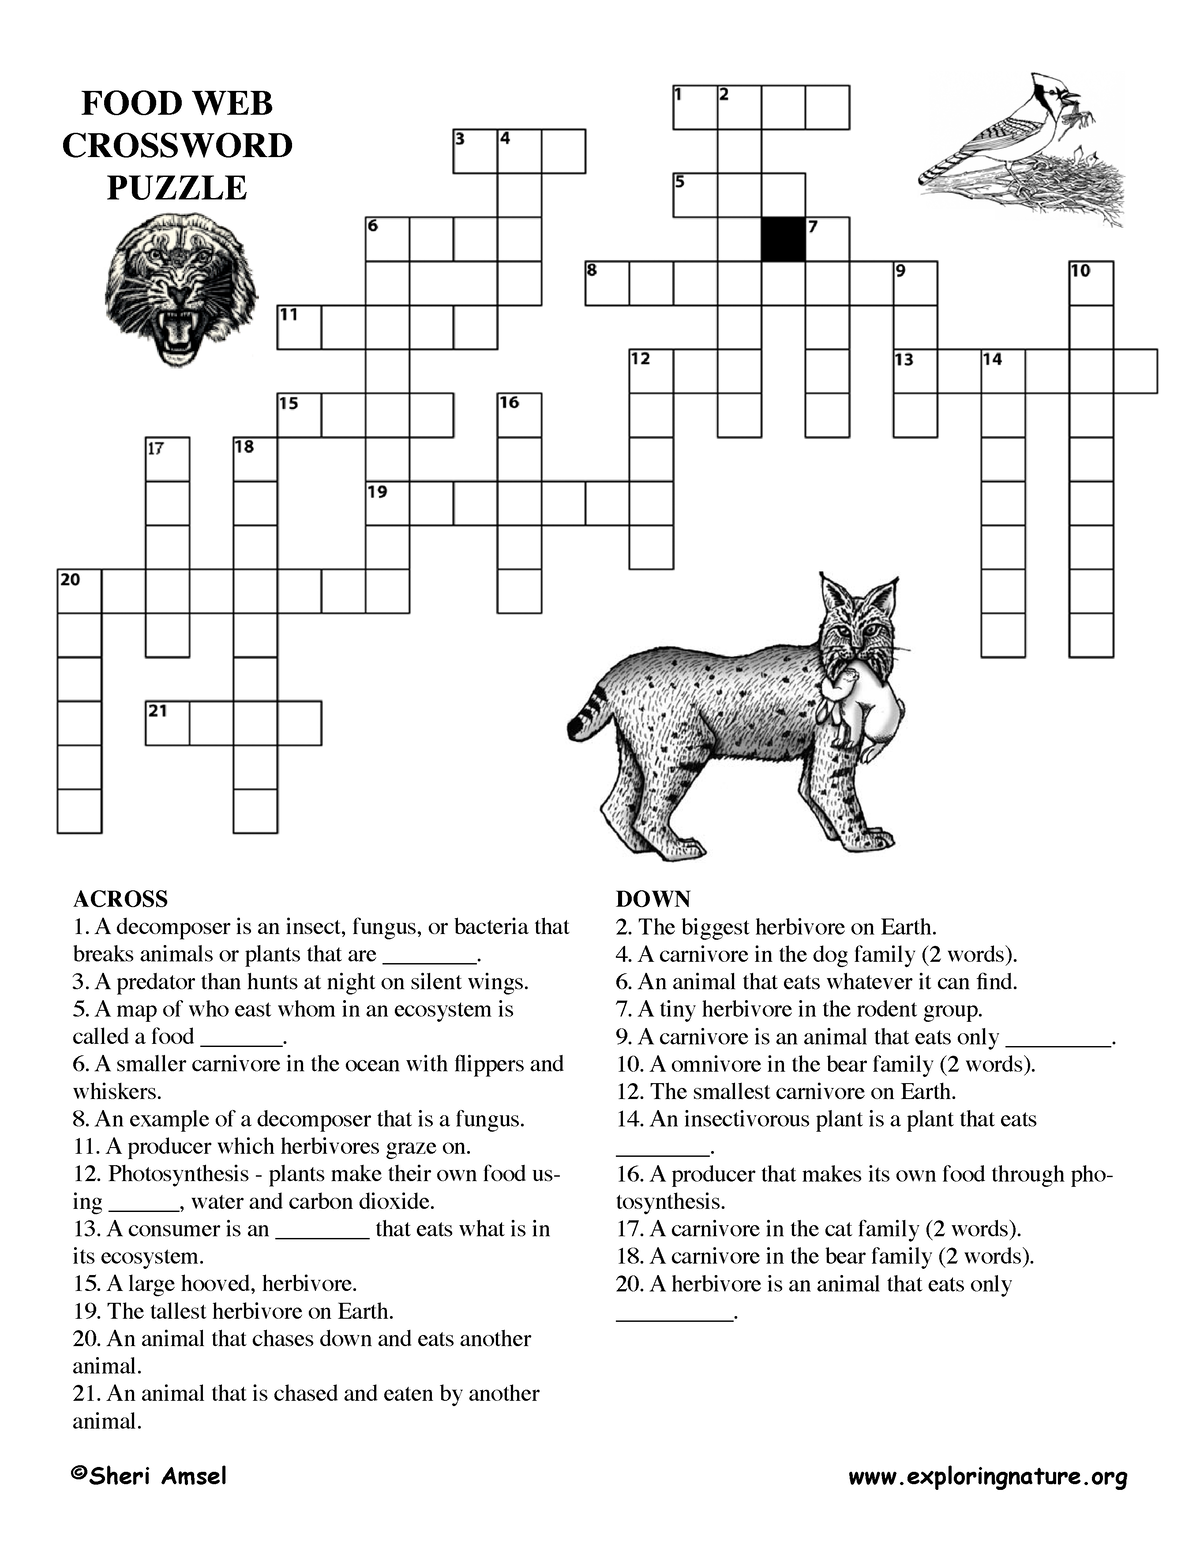 Crossword foodweb younger KEY ACROSS A decomposer is an insect